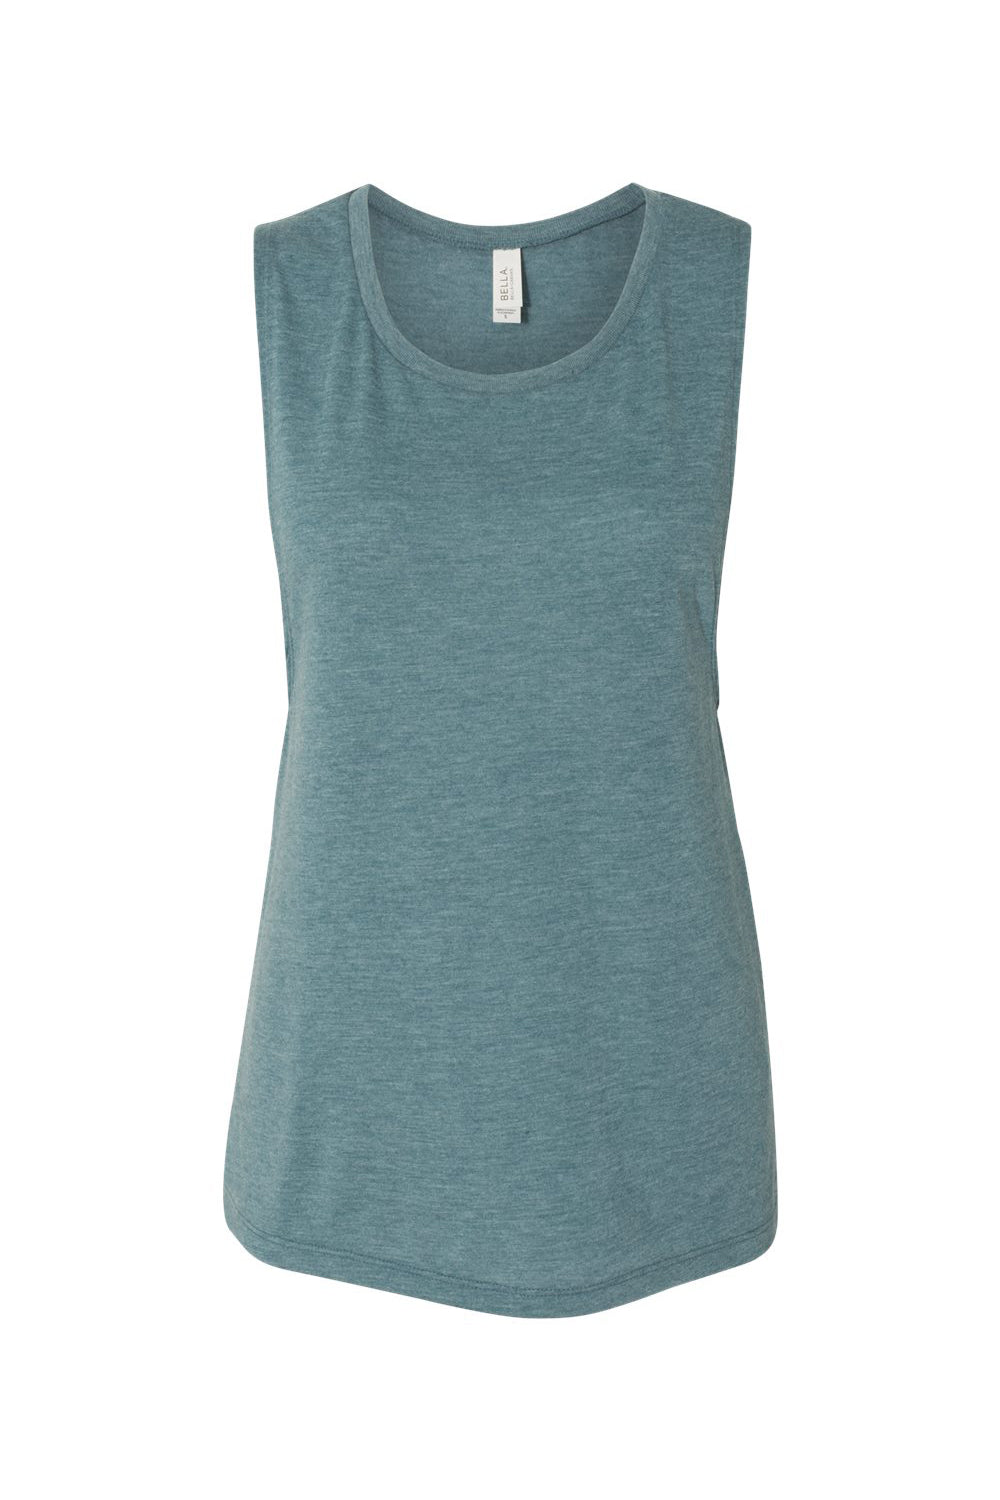 Bella + Canvas BC8803/B8803/8803 Womens Flowy Muscle Tank Top Heather Deep Teal Blue Flat Front